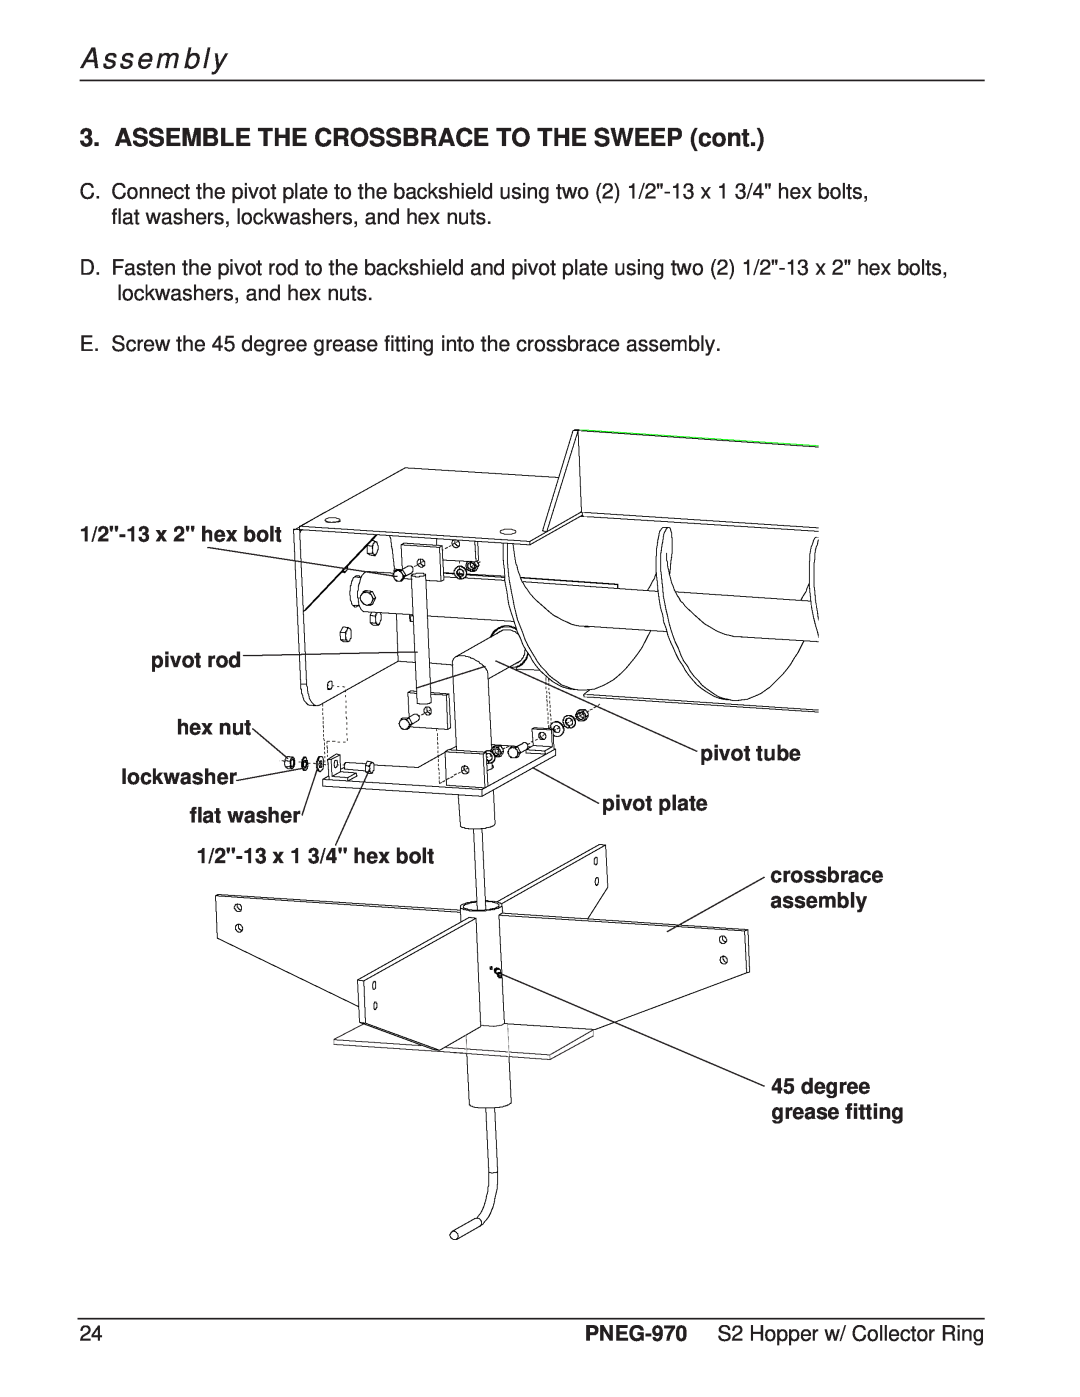 GSI Outdoors PNEG-970 operation manual ASSEMBLE THE CROSSBRACE TO THE SWEEP cont, Assembly, degree grease fitting 